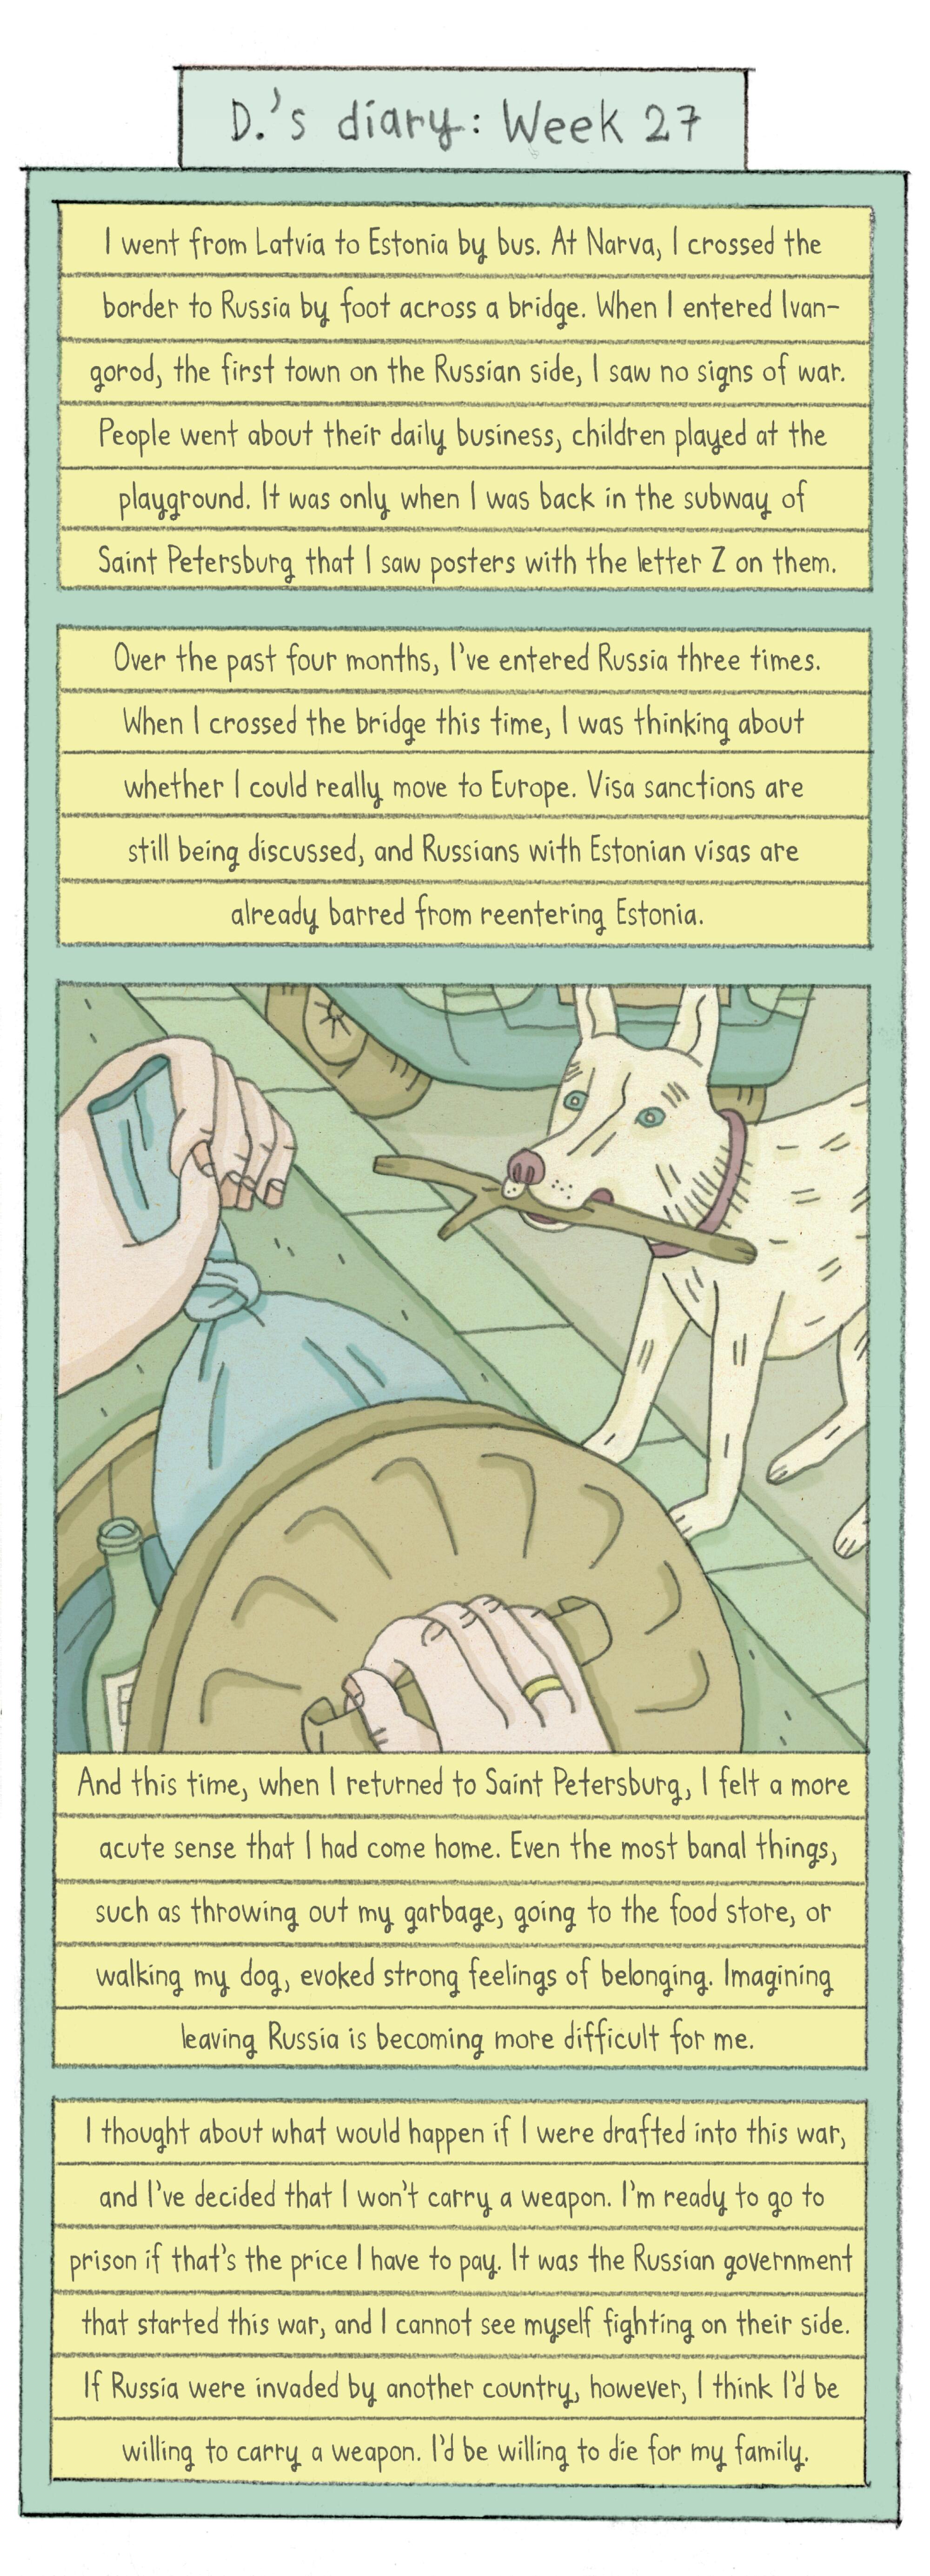 illustrated comic depicting someone putting garbage into a pail, with a white dog holding a stick nearby.